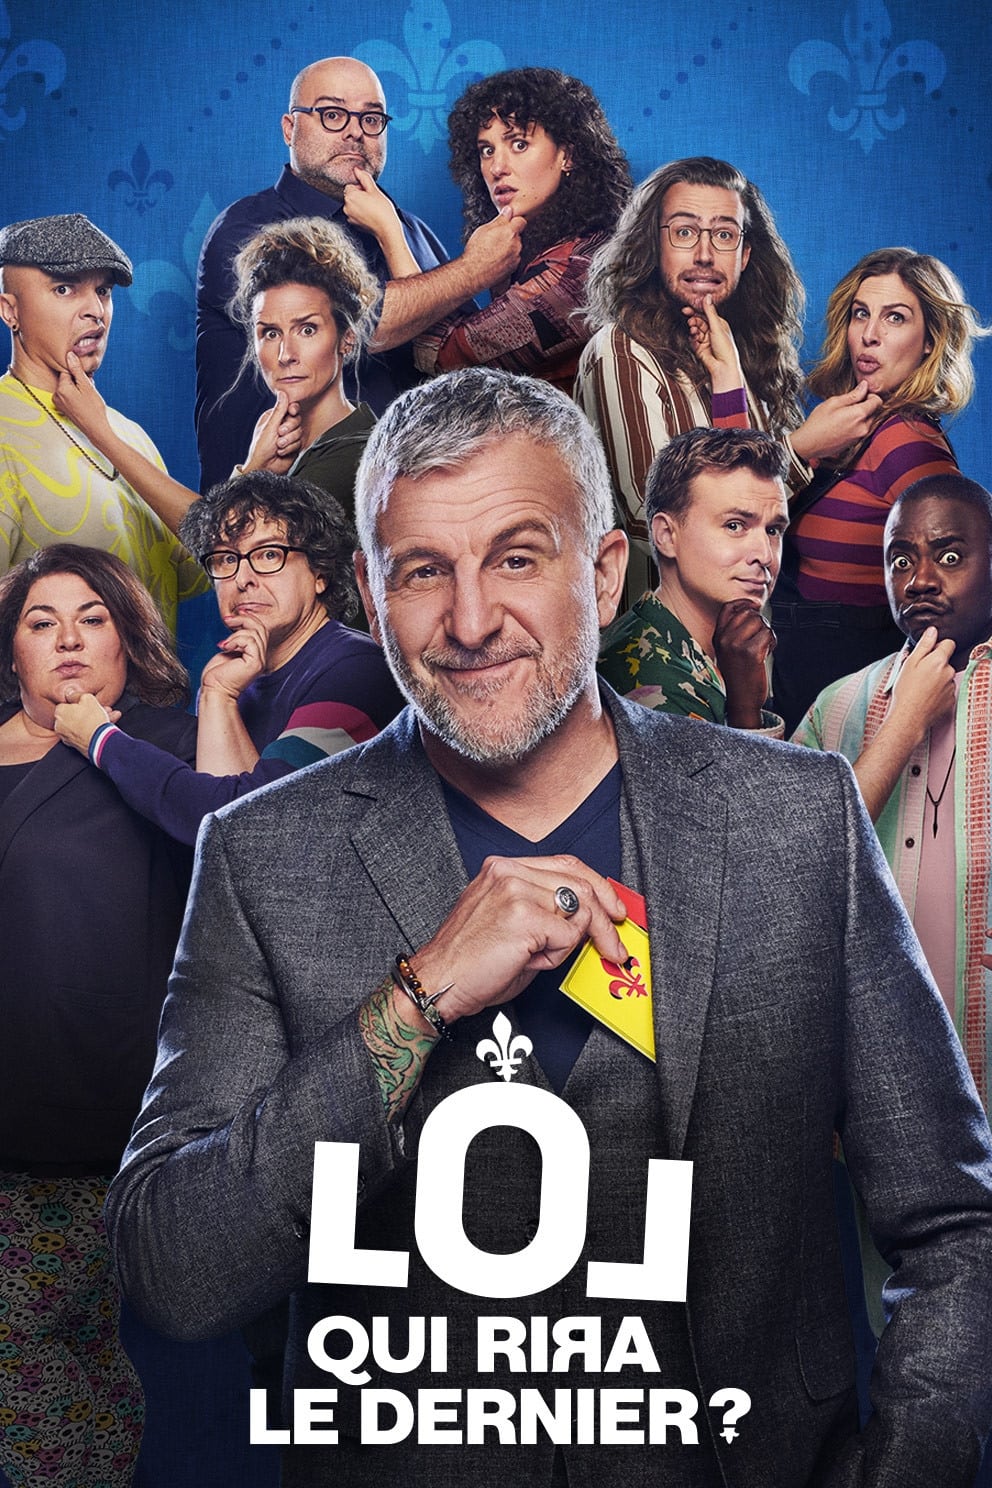 TV ratings for LOL: Last One Laughing Quebec (LOL: Qui Rira Le Dernier?) in South Africa. Amazon Prime Video TV series